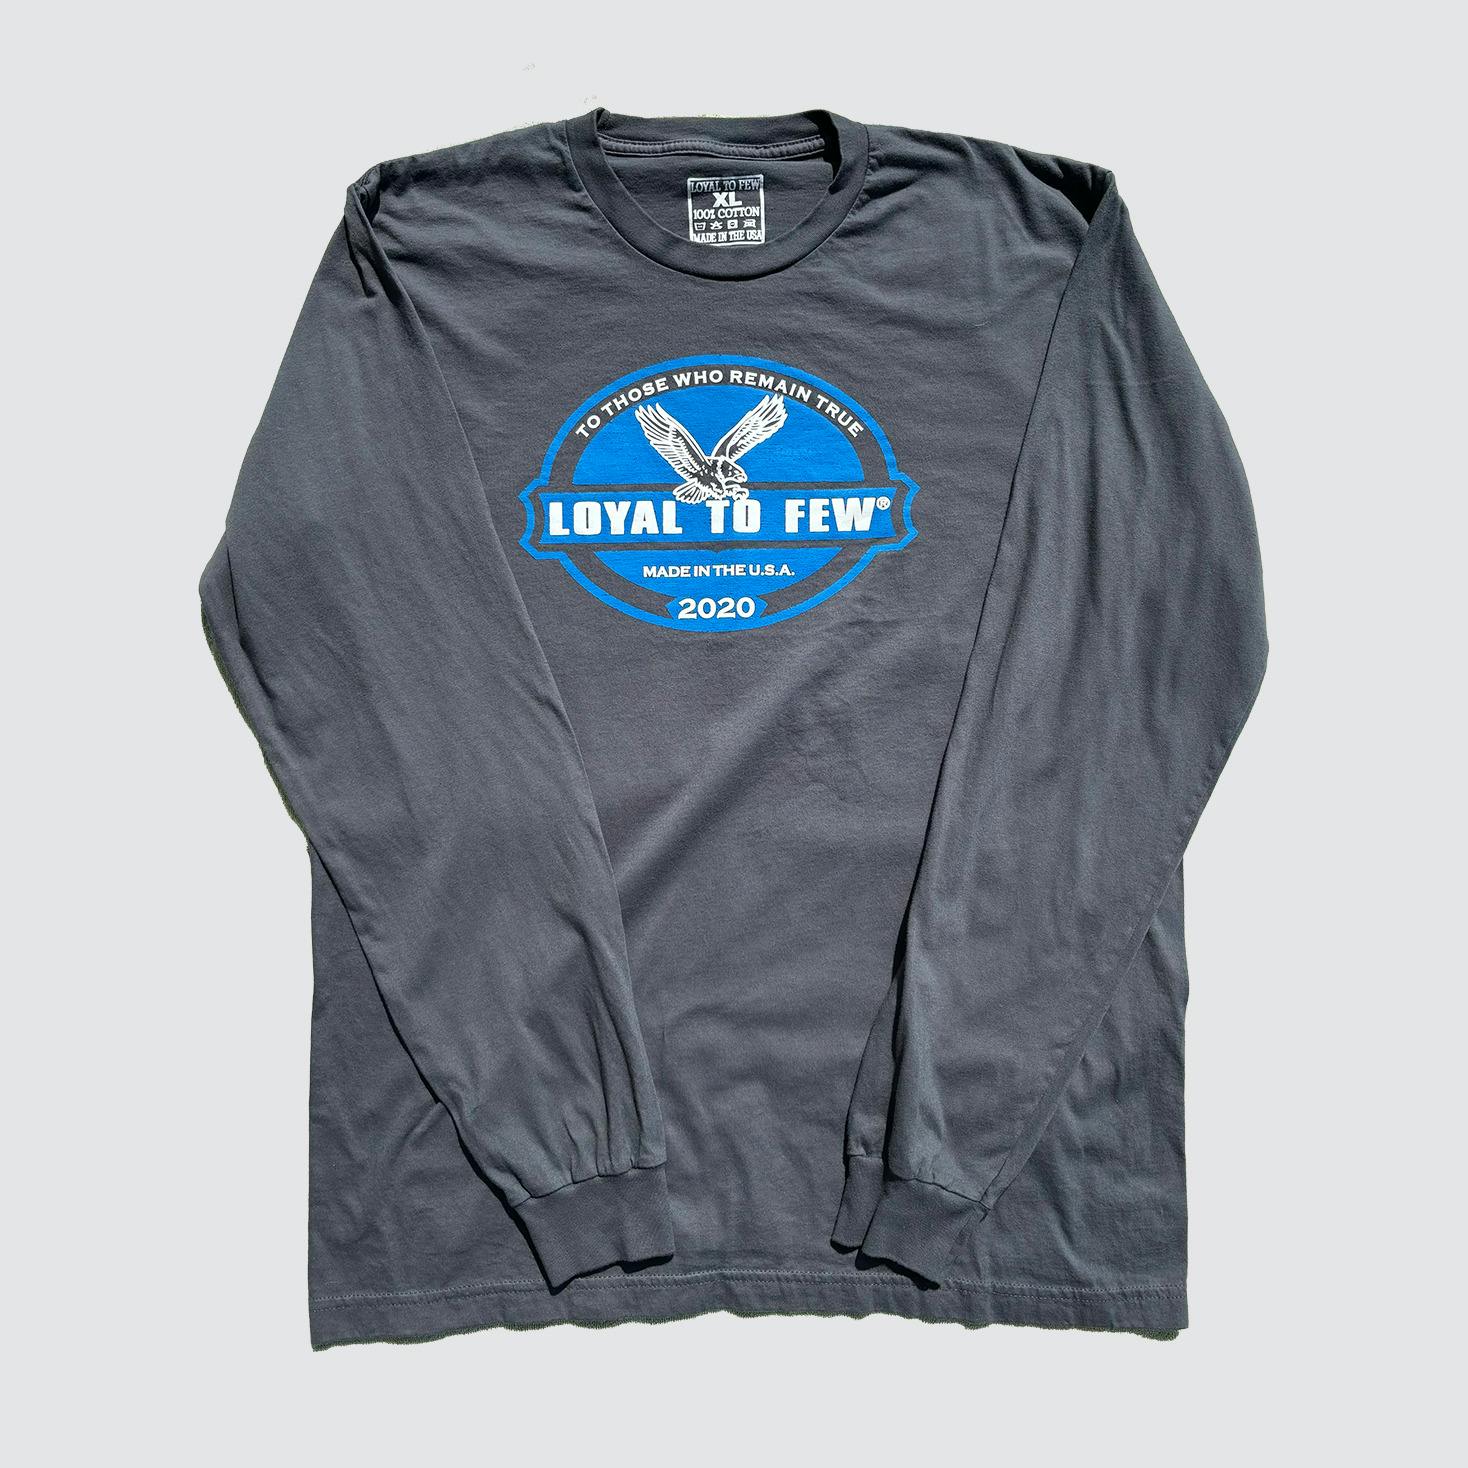 Cotton Long-Sleeve with Remain True